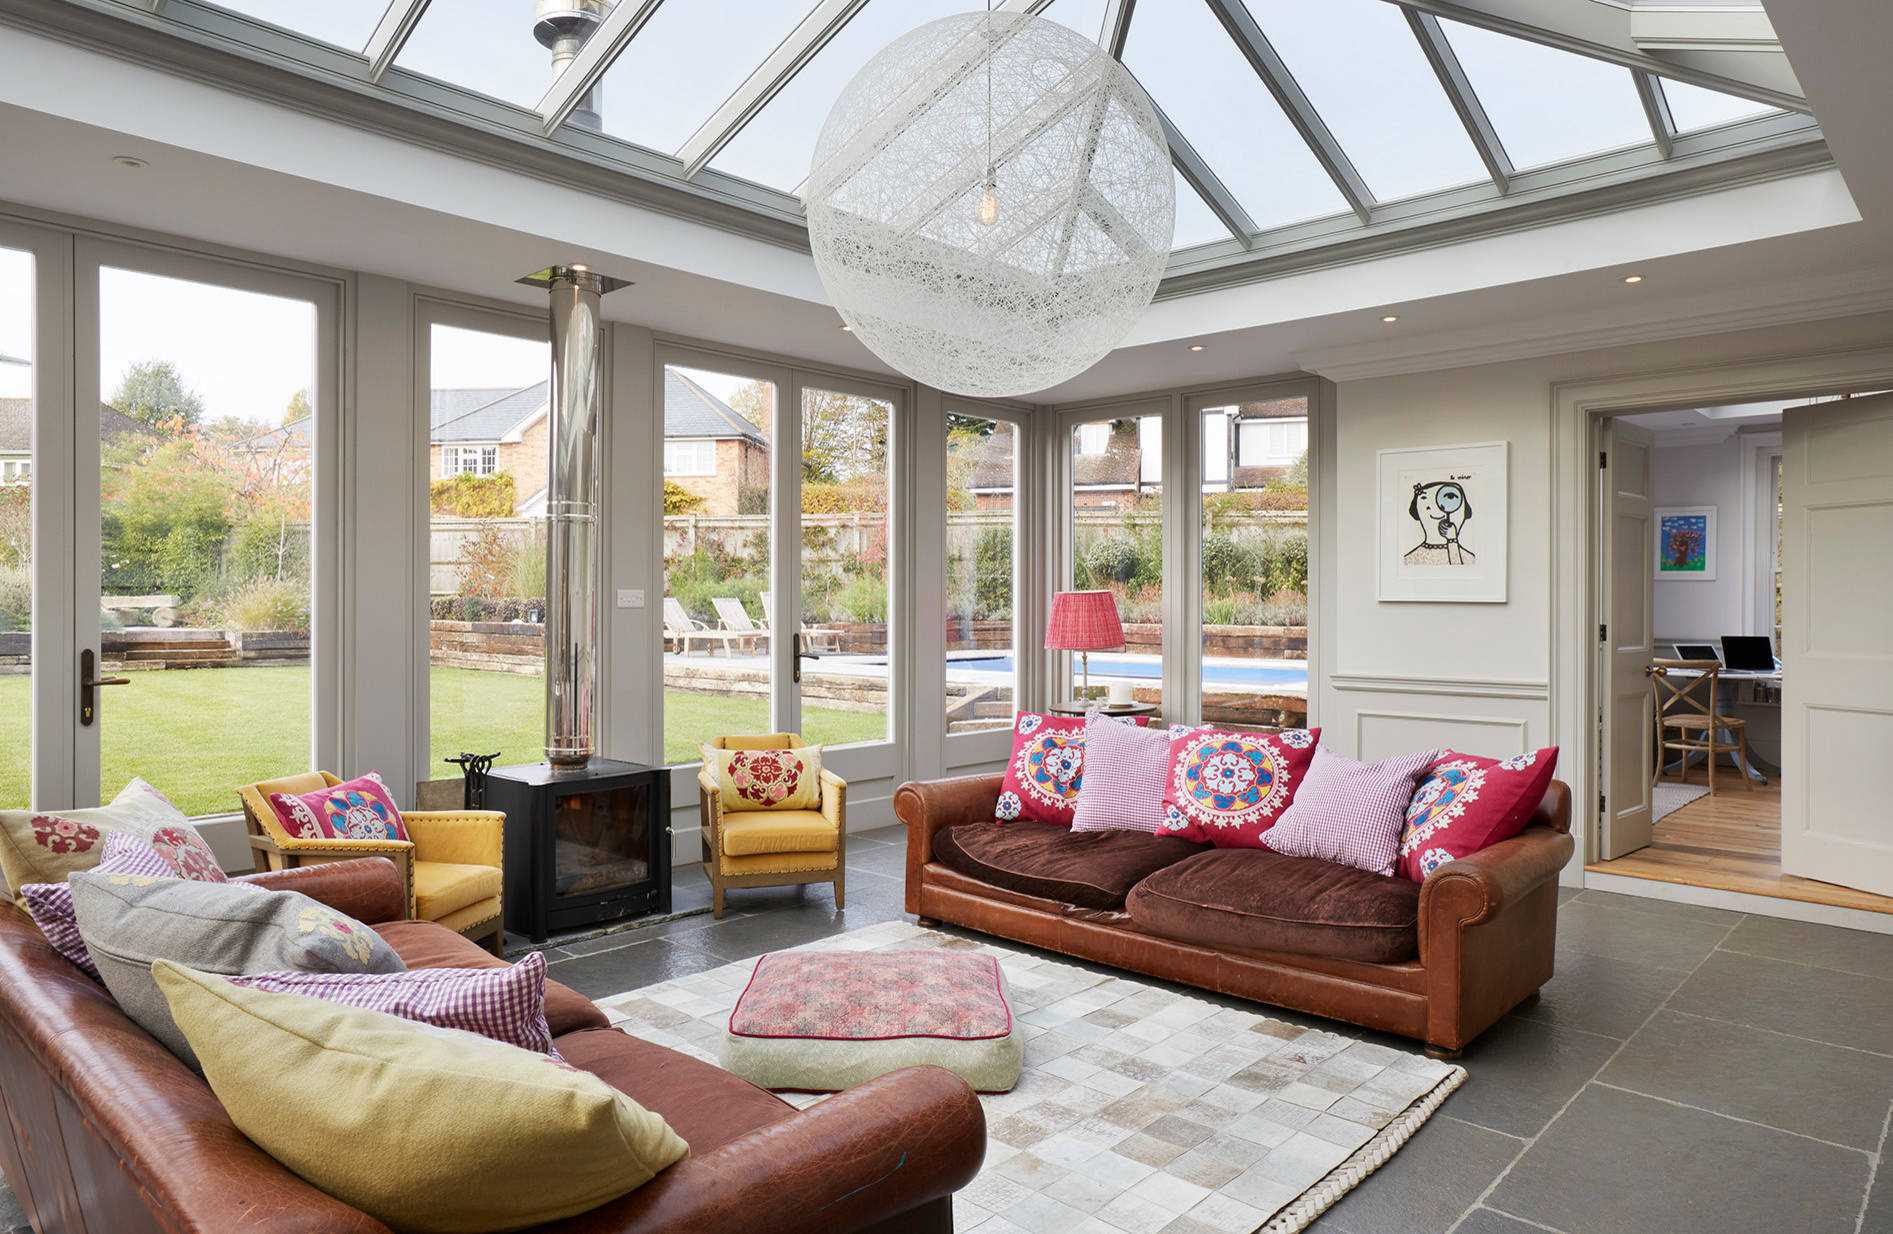 15 Light & Bright Eclectic Sunroom Designs You'll Fall In Love With